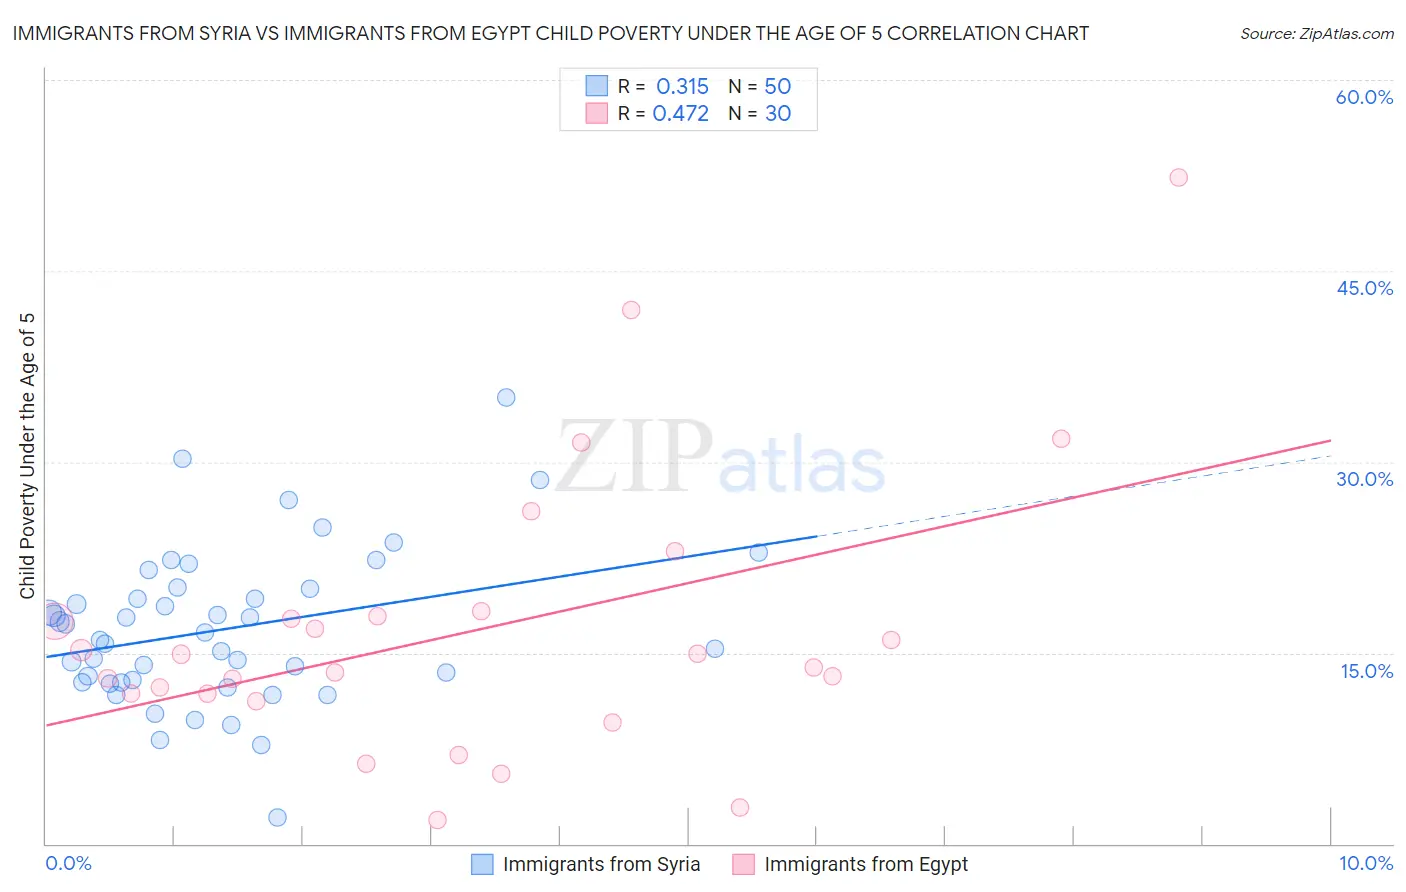 Immigrants from Syria vs Immigrants from Egypt Child Poverty Under the Age of 5